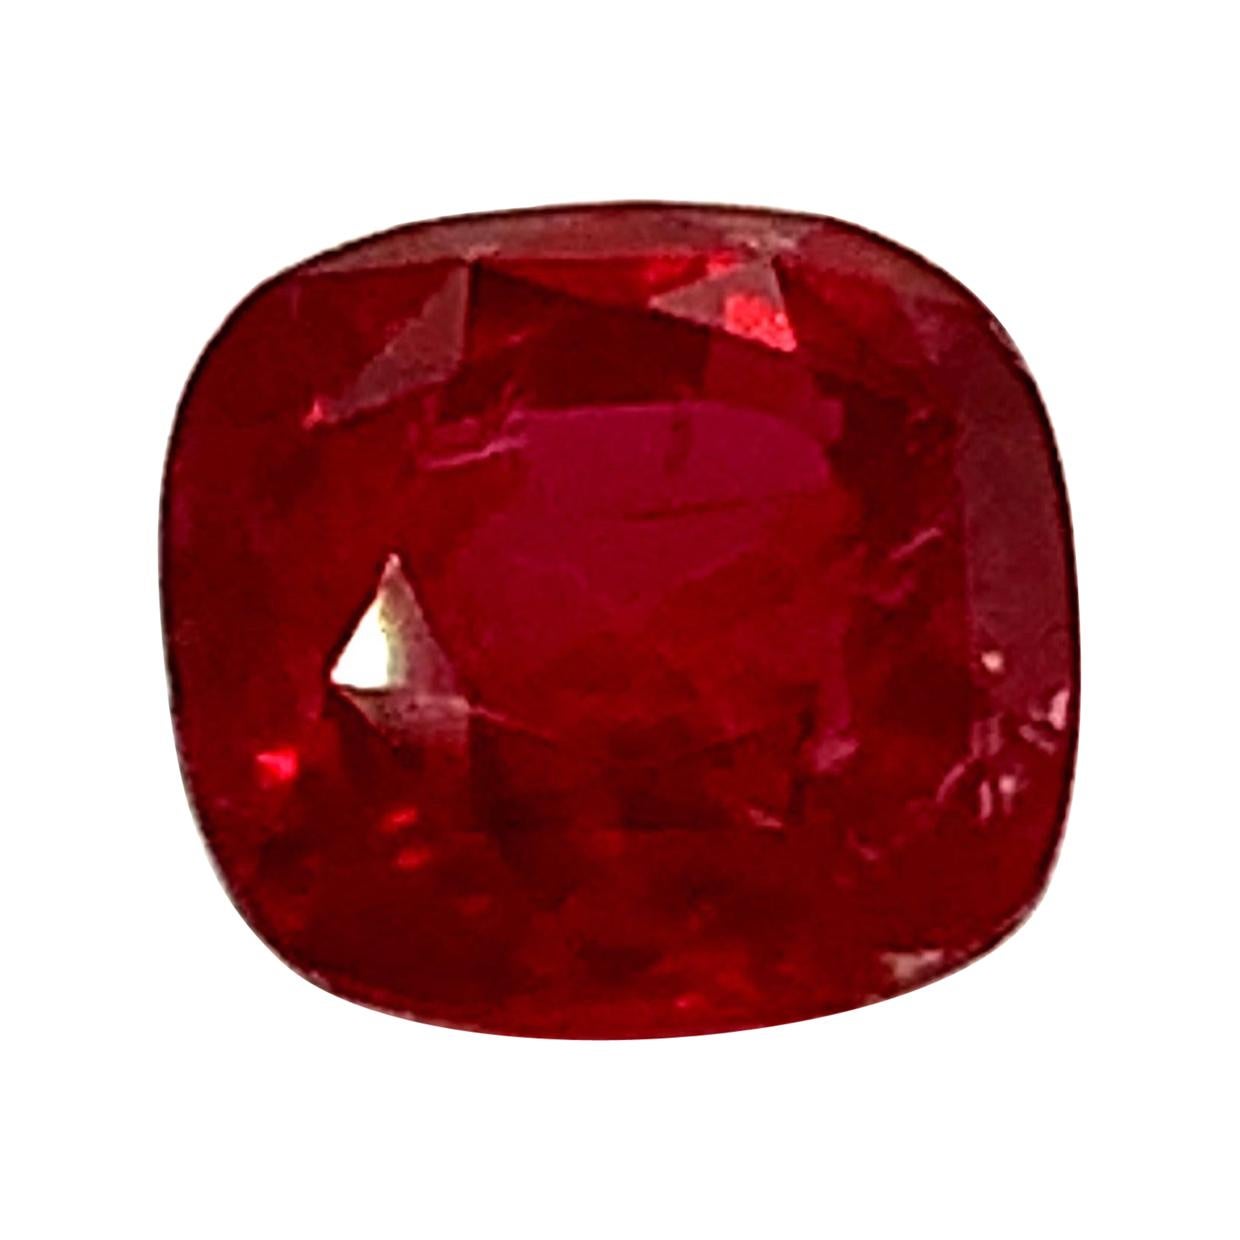 Unheated 3.53 Carat “Pigeon’s Blood” Ruby, GIA Certified